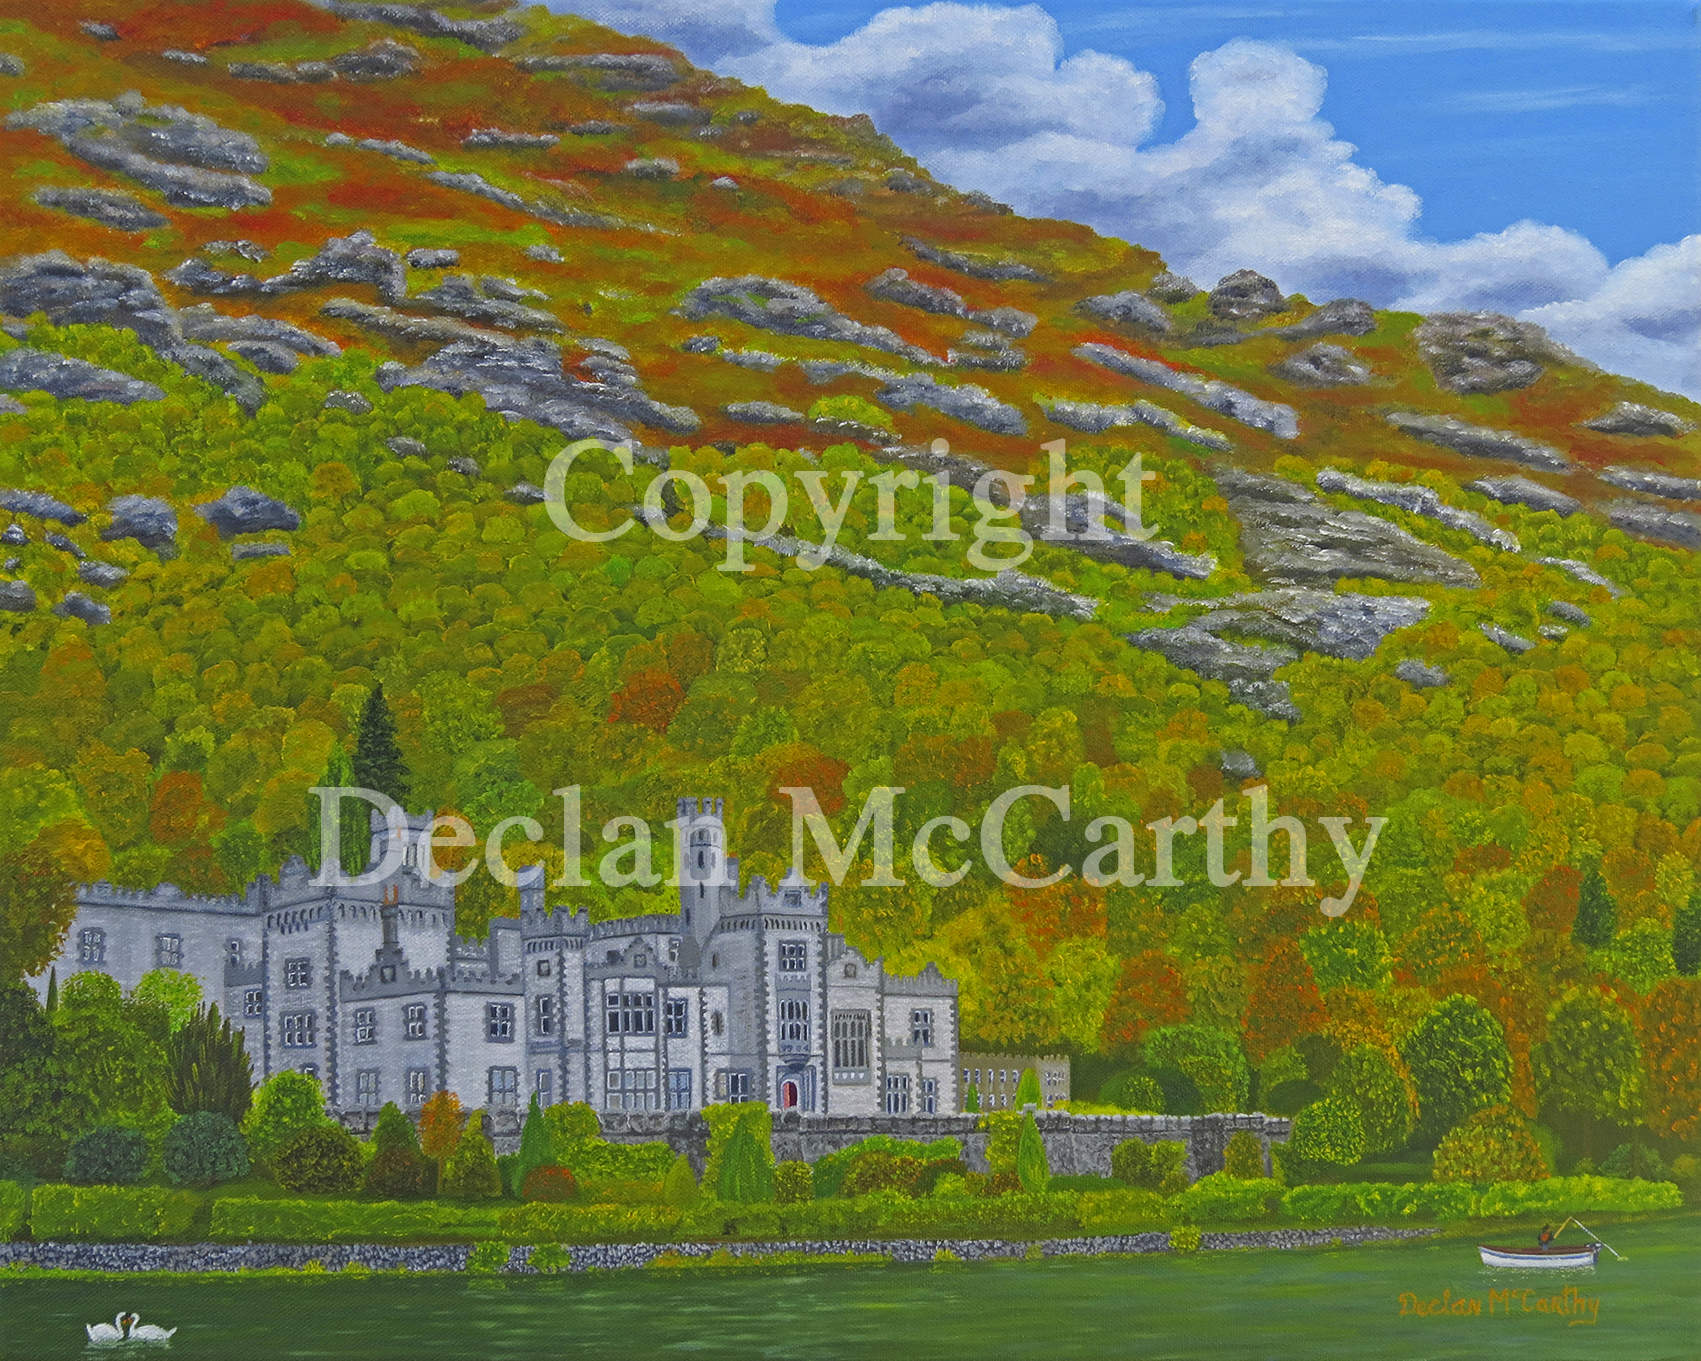 Kylemore Abbey, Connemara, Co. Galway. Painted as a present to a friend who attended school here.